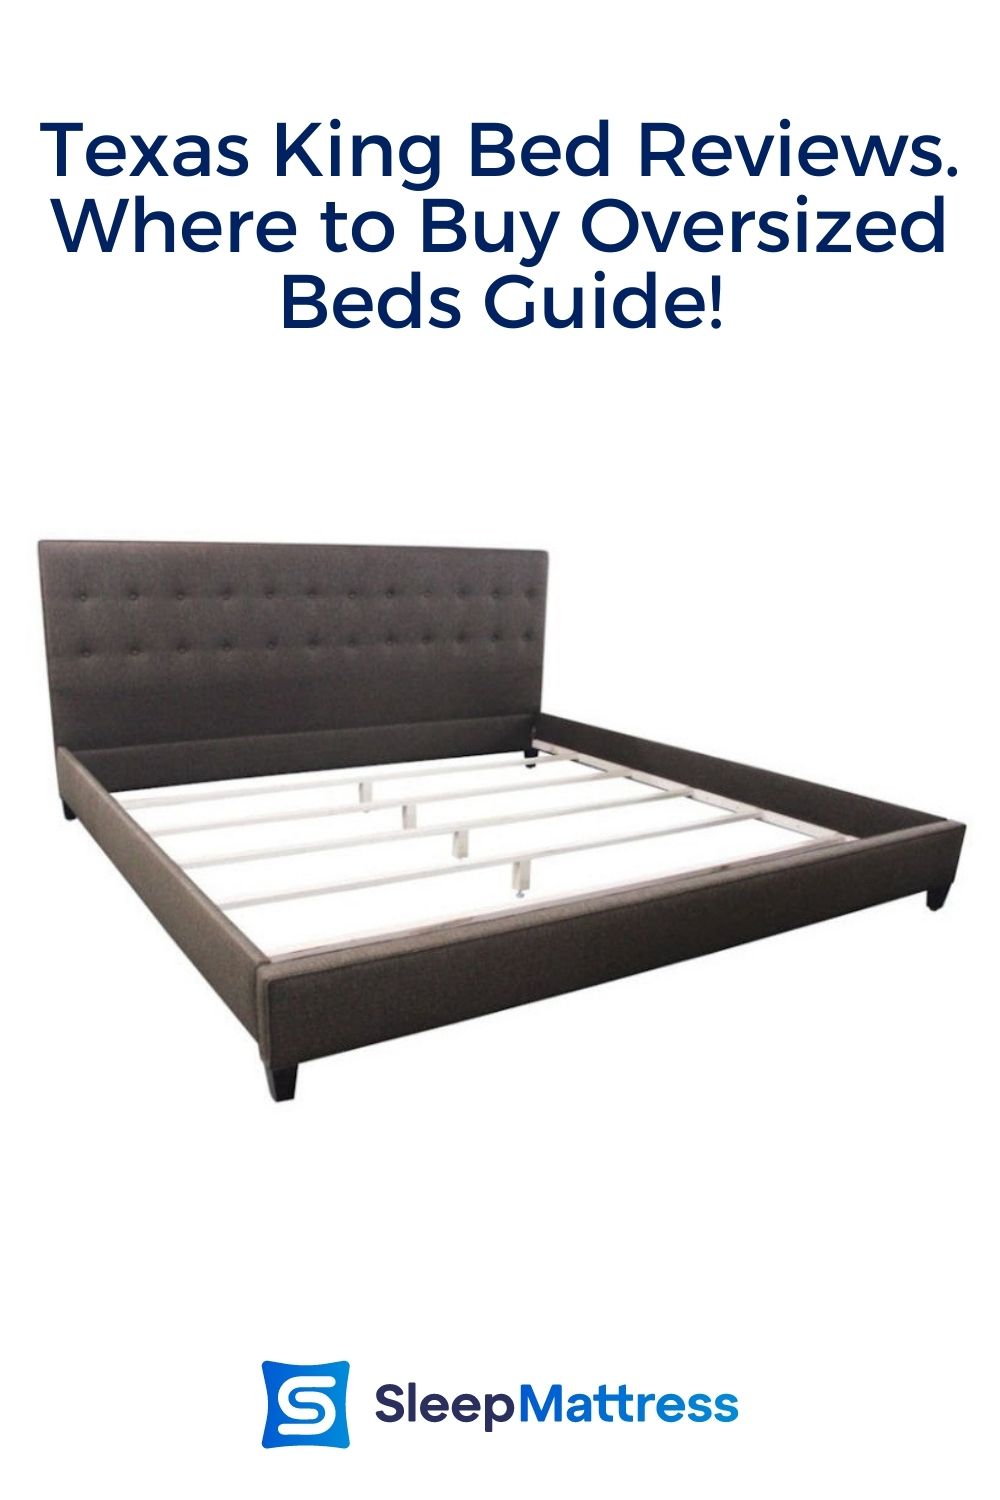 Texas King Bed Reviews. Where to Buy Oversized Beds Guide!